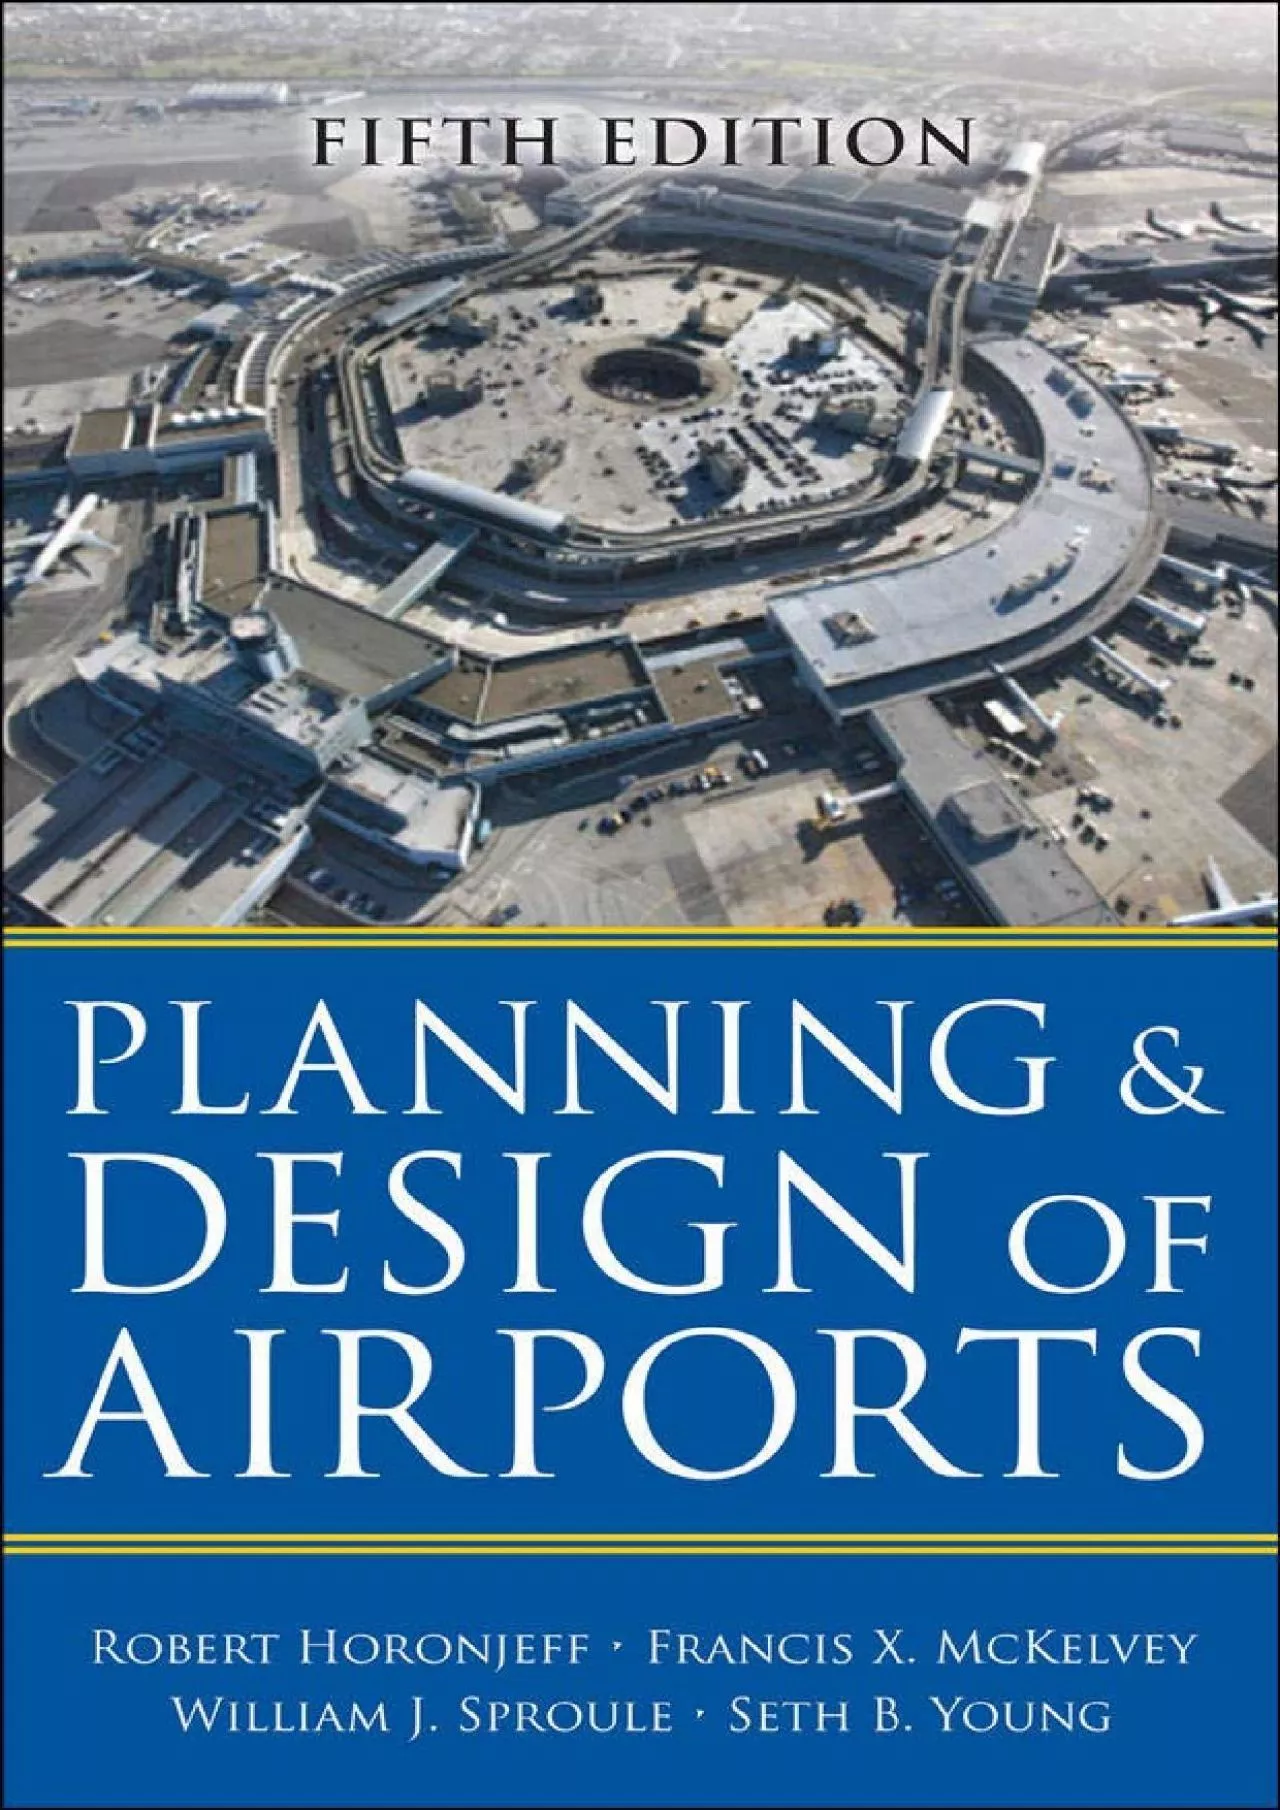 (EBOOK)-Planning and Design of Airports, Fifth Edition